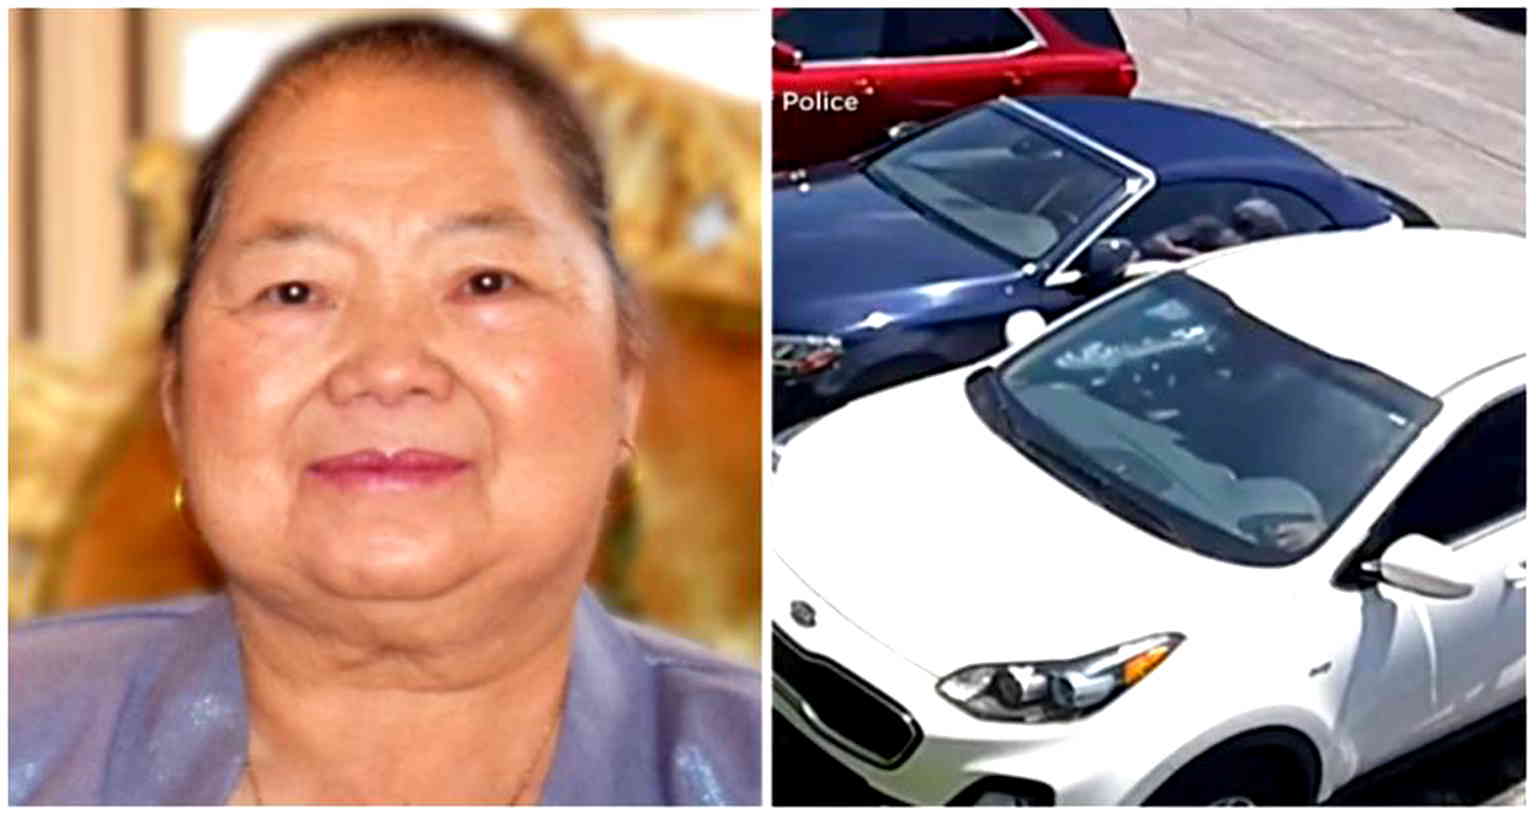 Teen arrested in connection to St. Paul hit-and-run that killed beloved Hmong woman